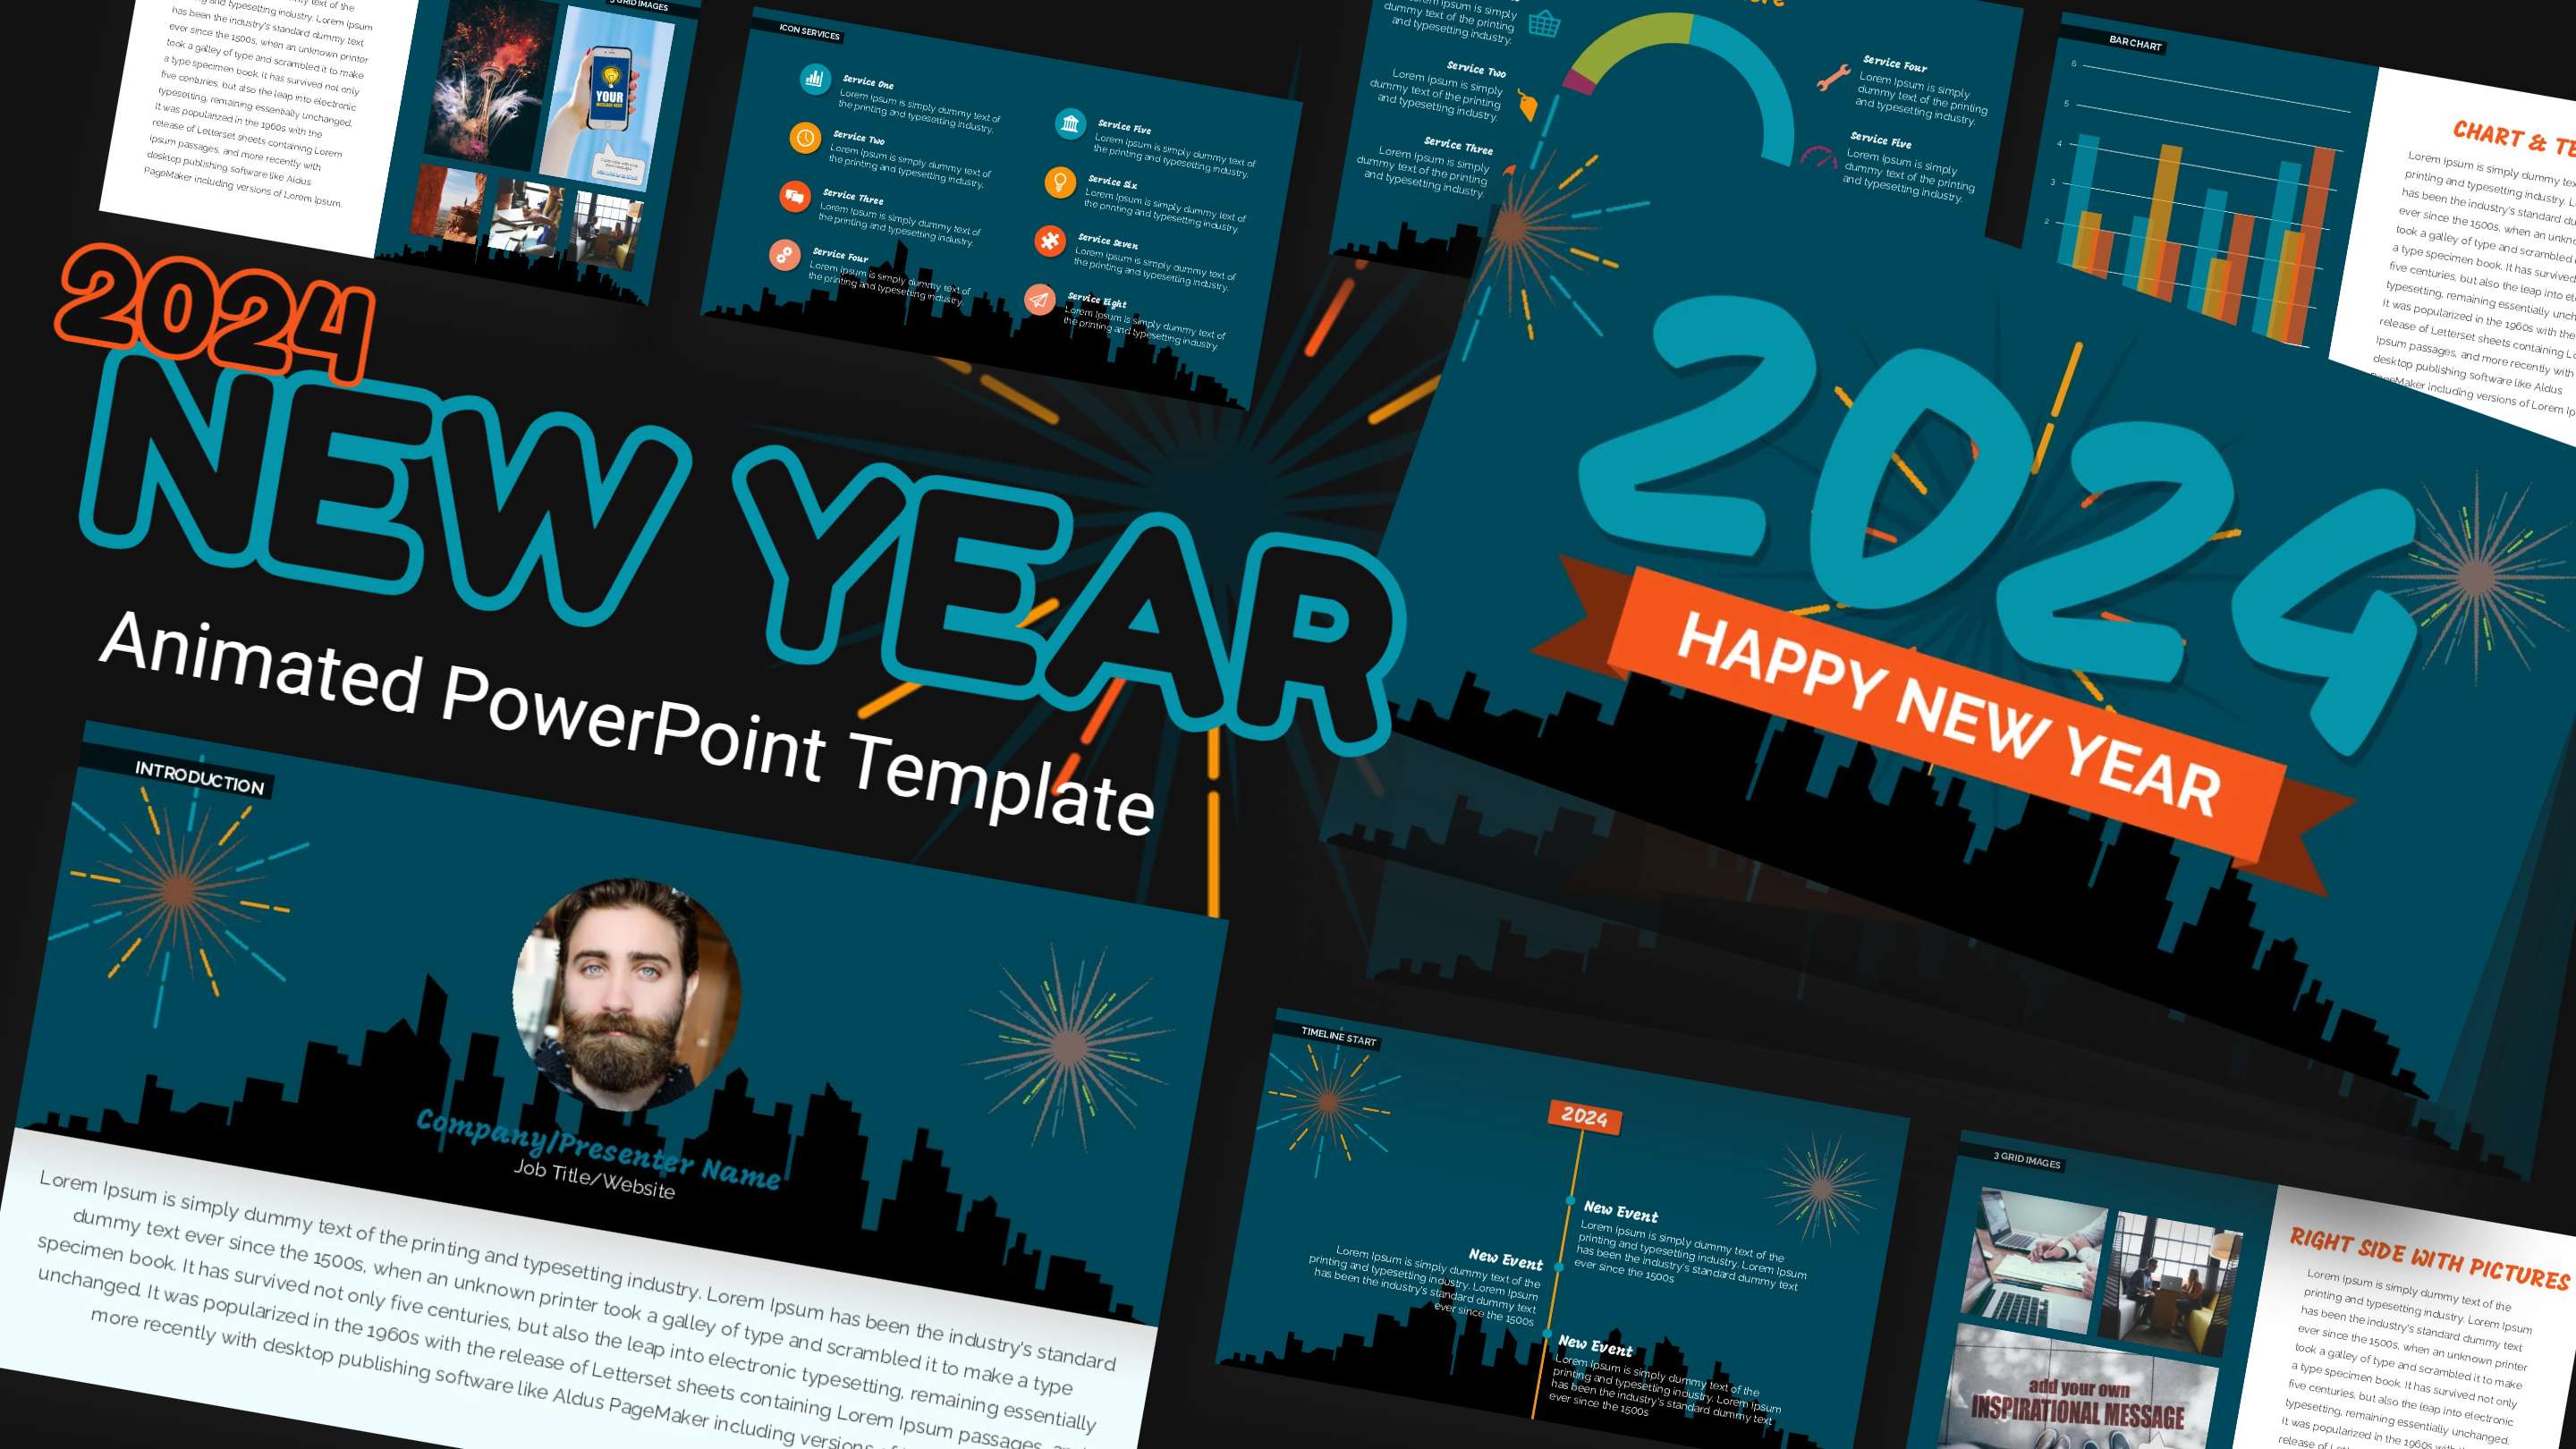 animated fireworks background for powerpoint